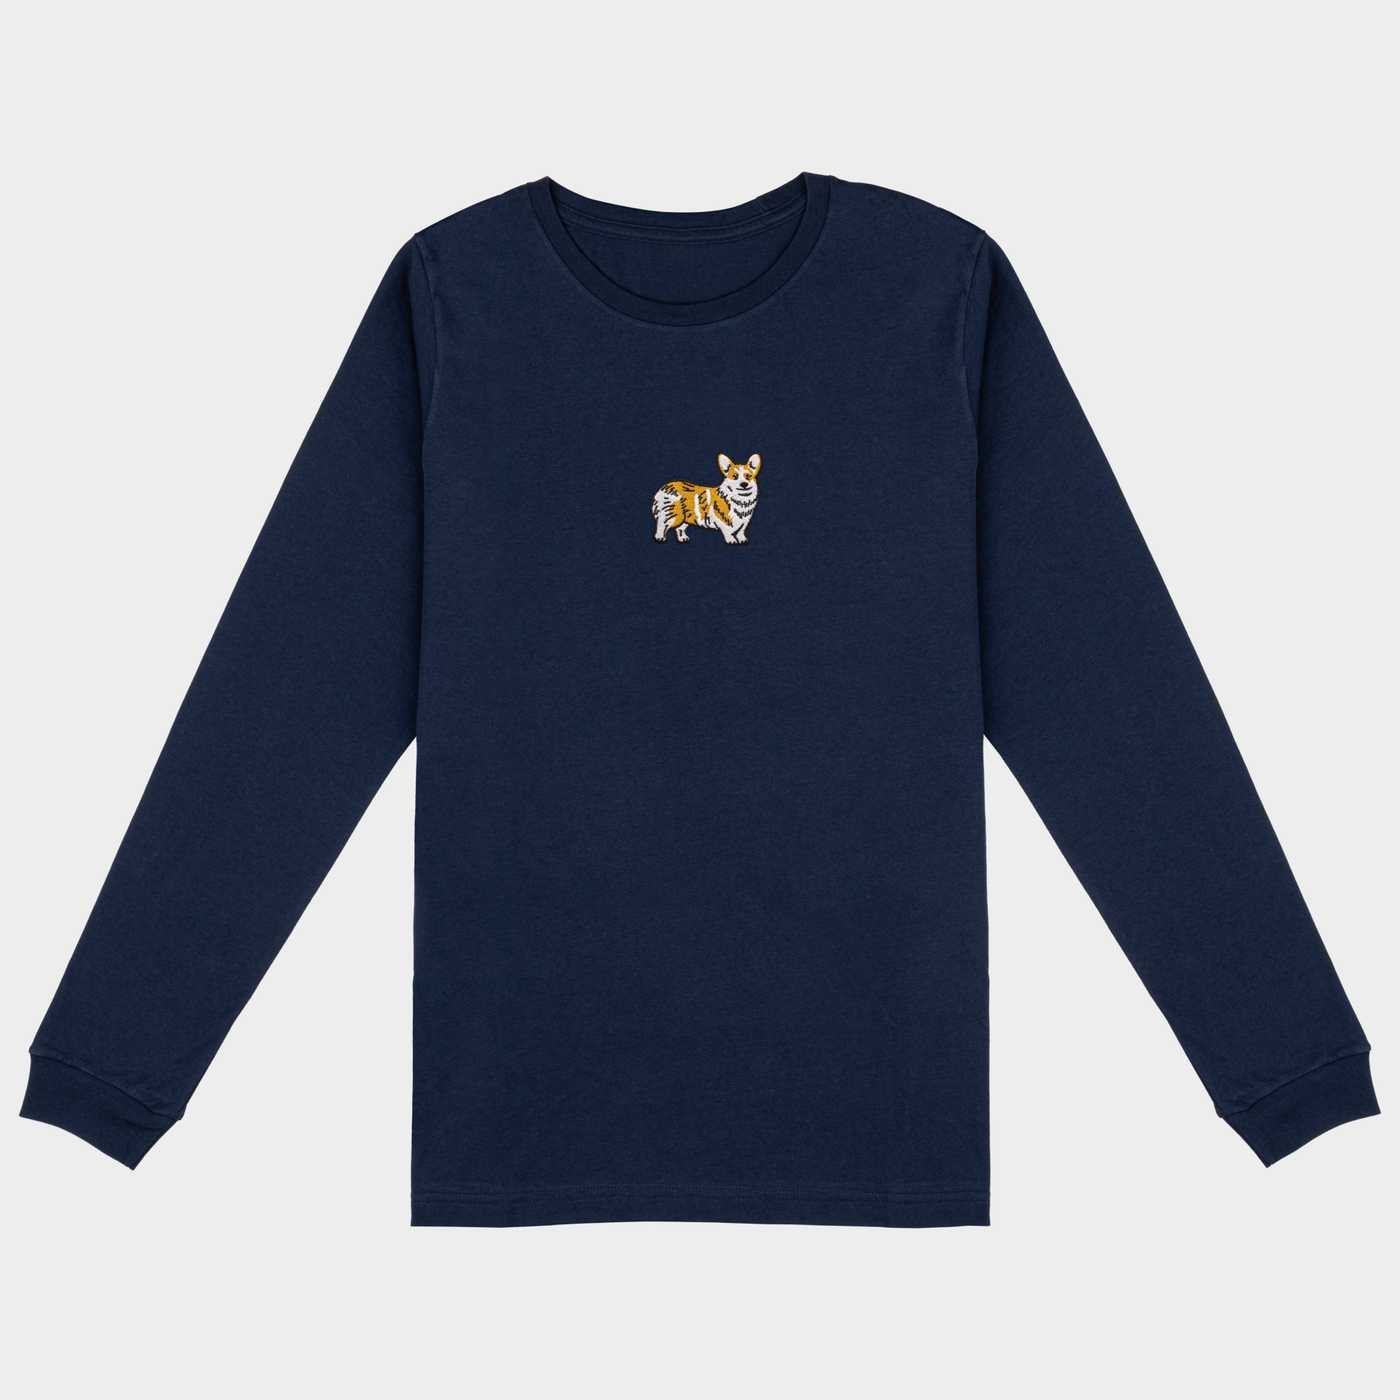 Bobby's Planet Women's Embroidered Corgi Long Sleeve Shirt from Paws Dog Cat Animals Collection in Navy Color#color_navy